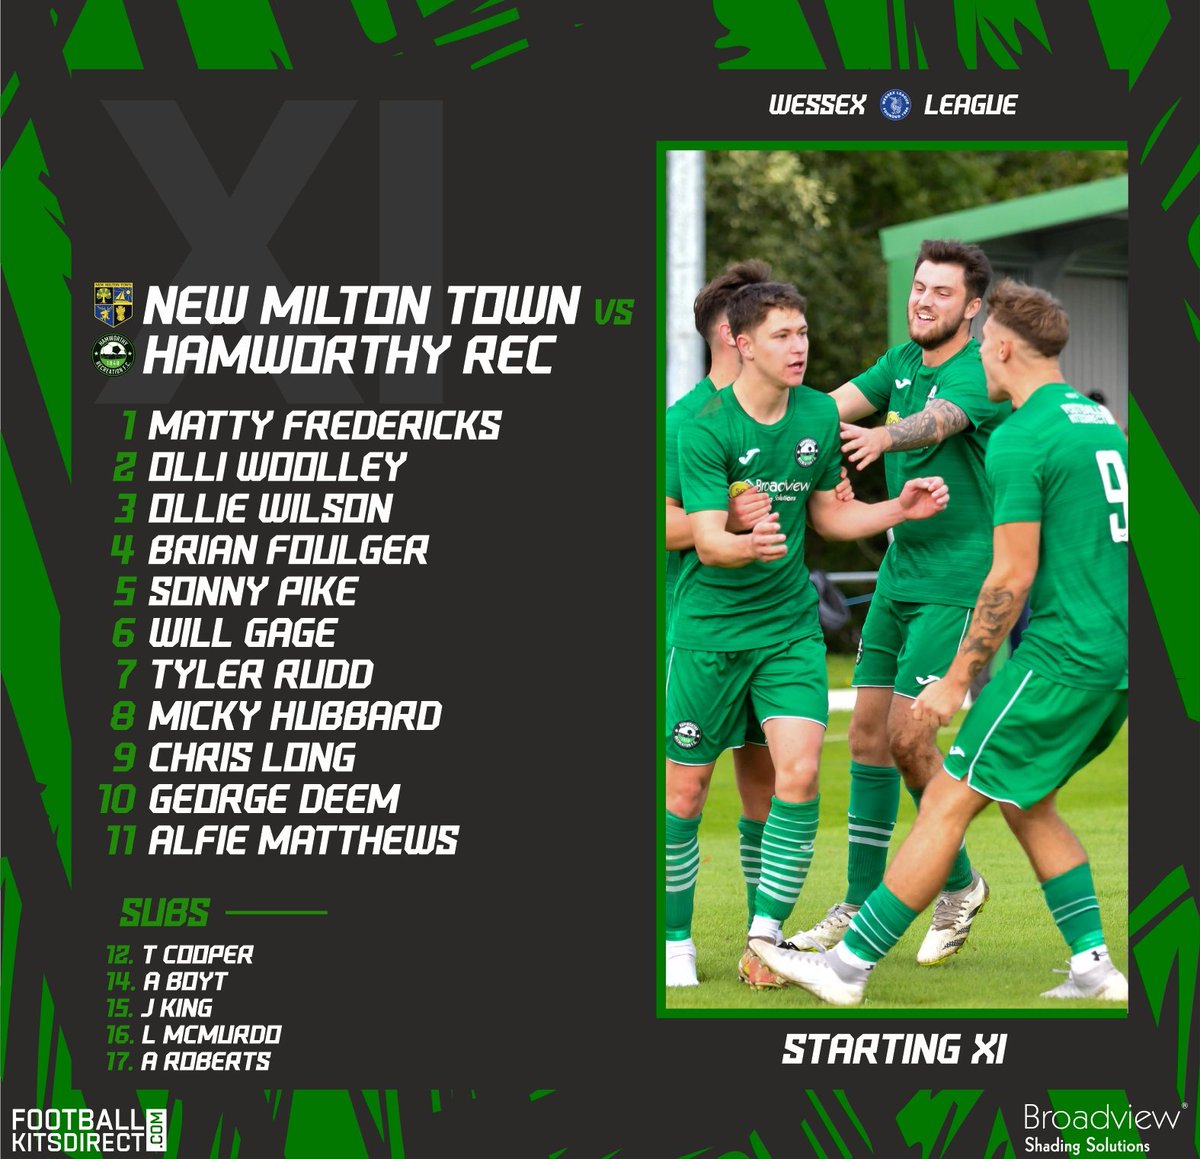 𝗦𝗧𝗔𝗥𝗧𝗜𝗡𝗚 𝟭𝟭 | 🟩 Here is our Rec line up for this evening's match against @NMTFC2017 #UpTheRec